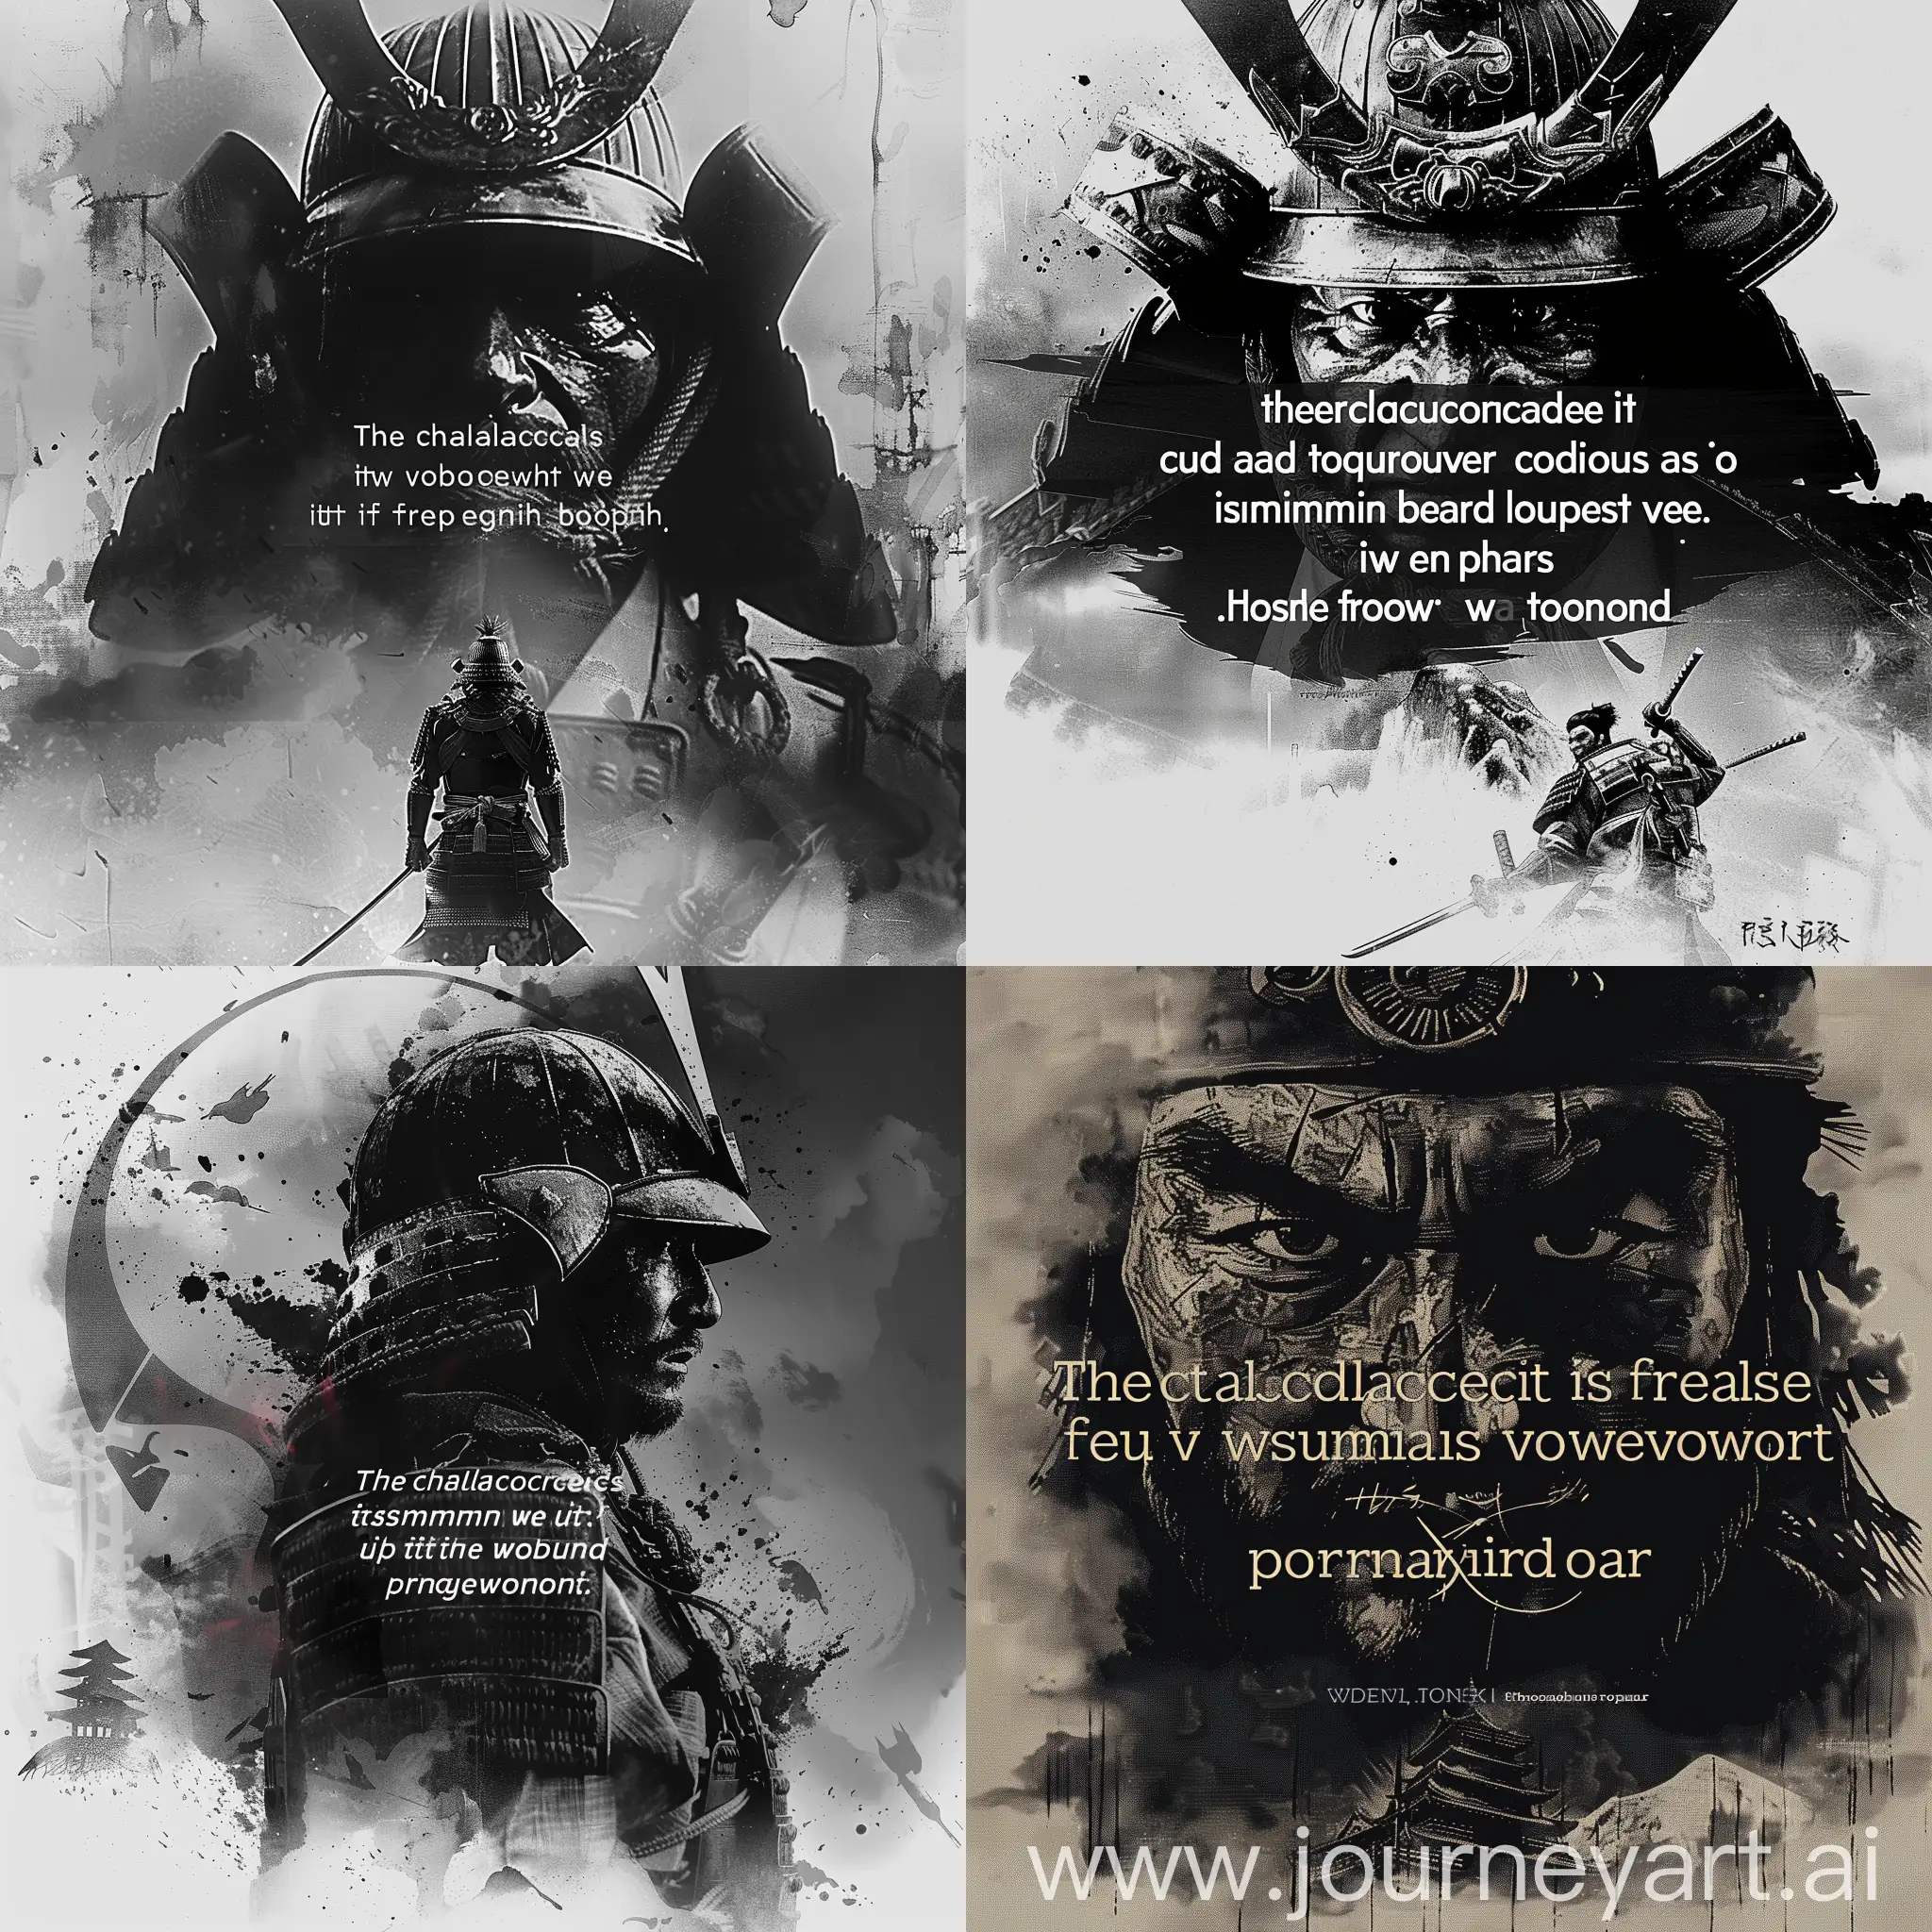 Courageous-Wisdom-Inspirational-Samurai-Quote-in-Black-and-White